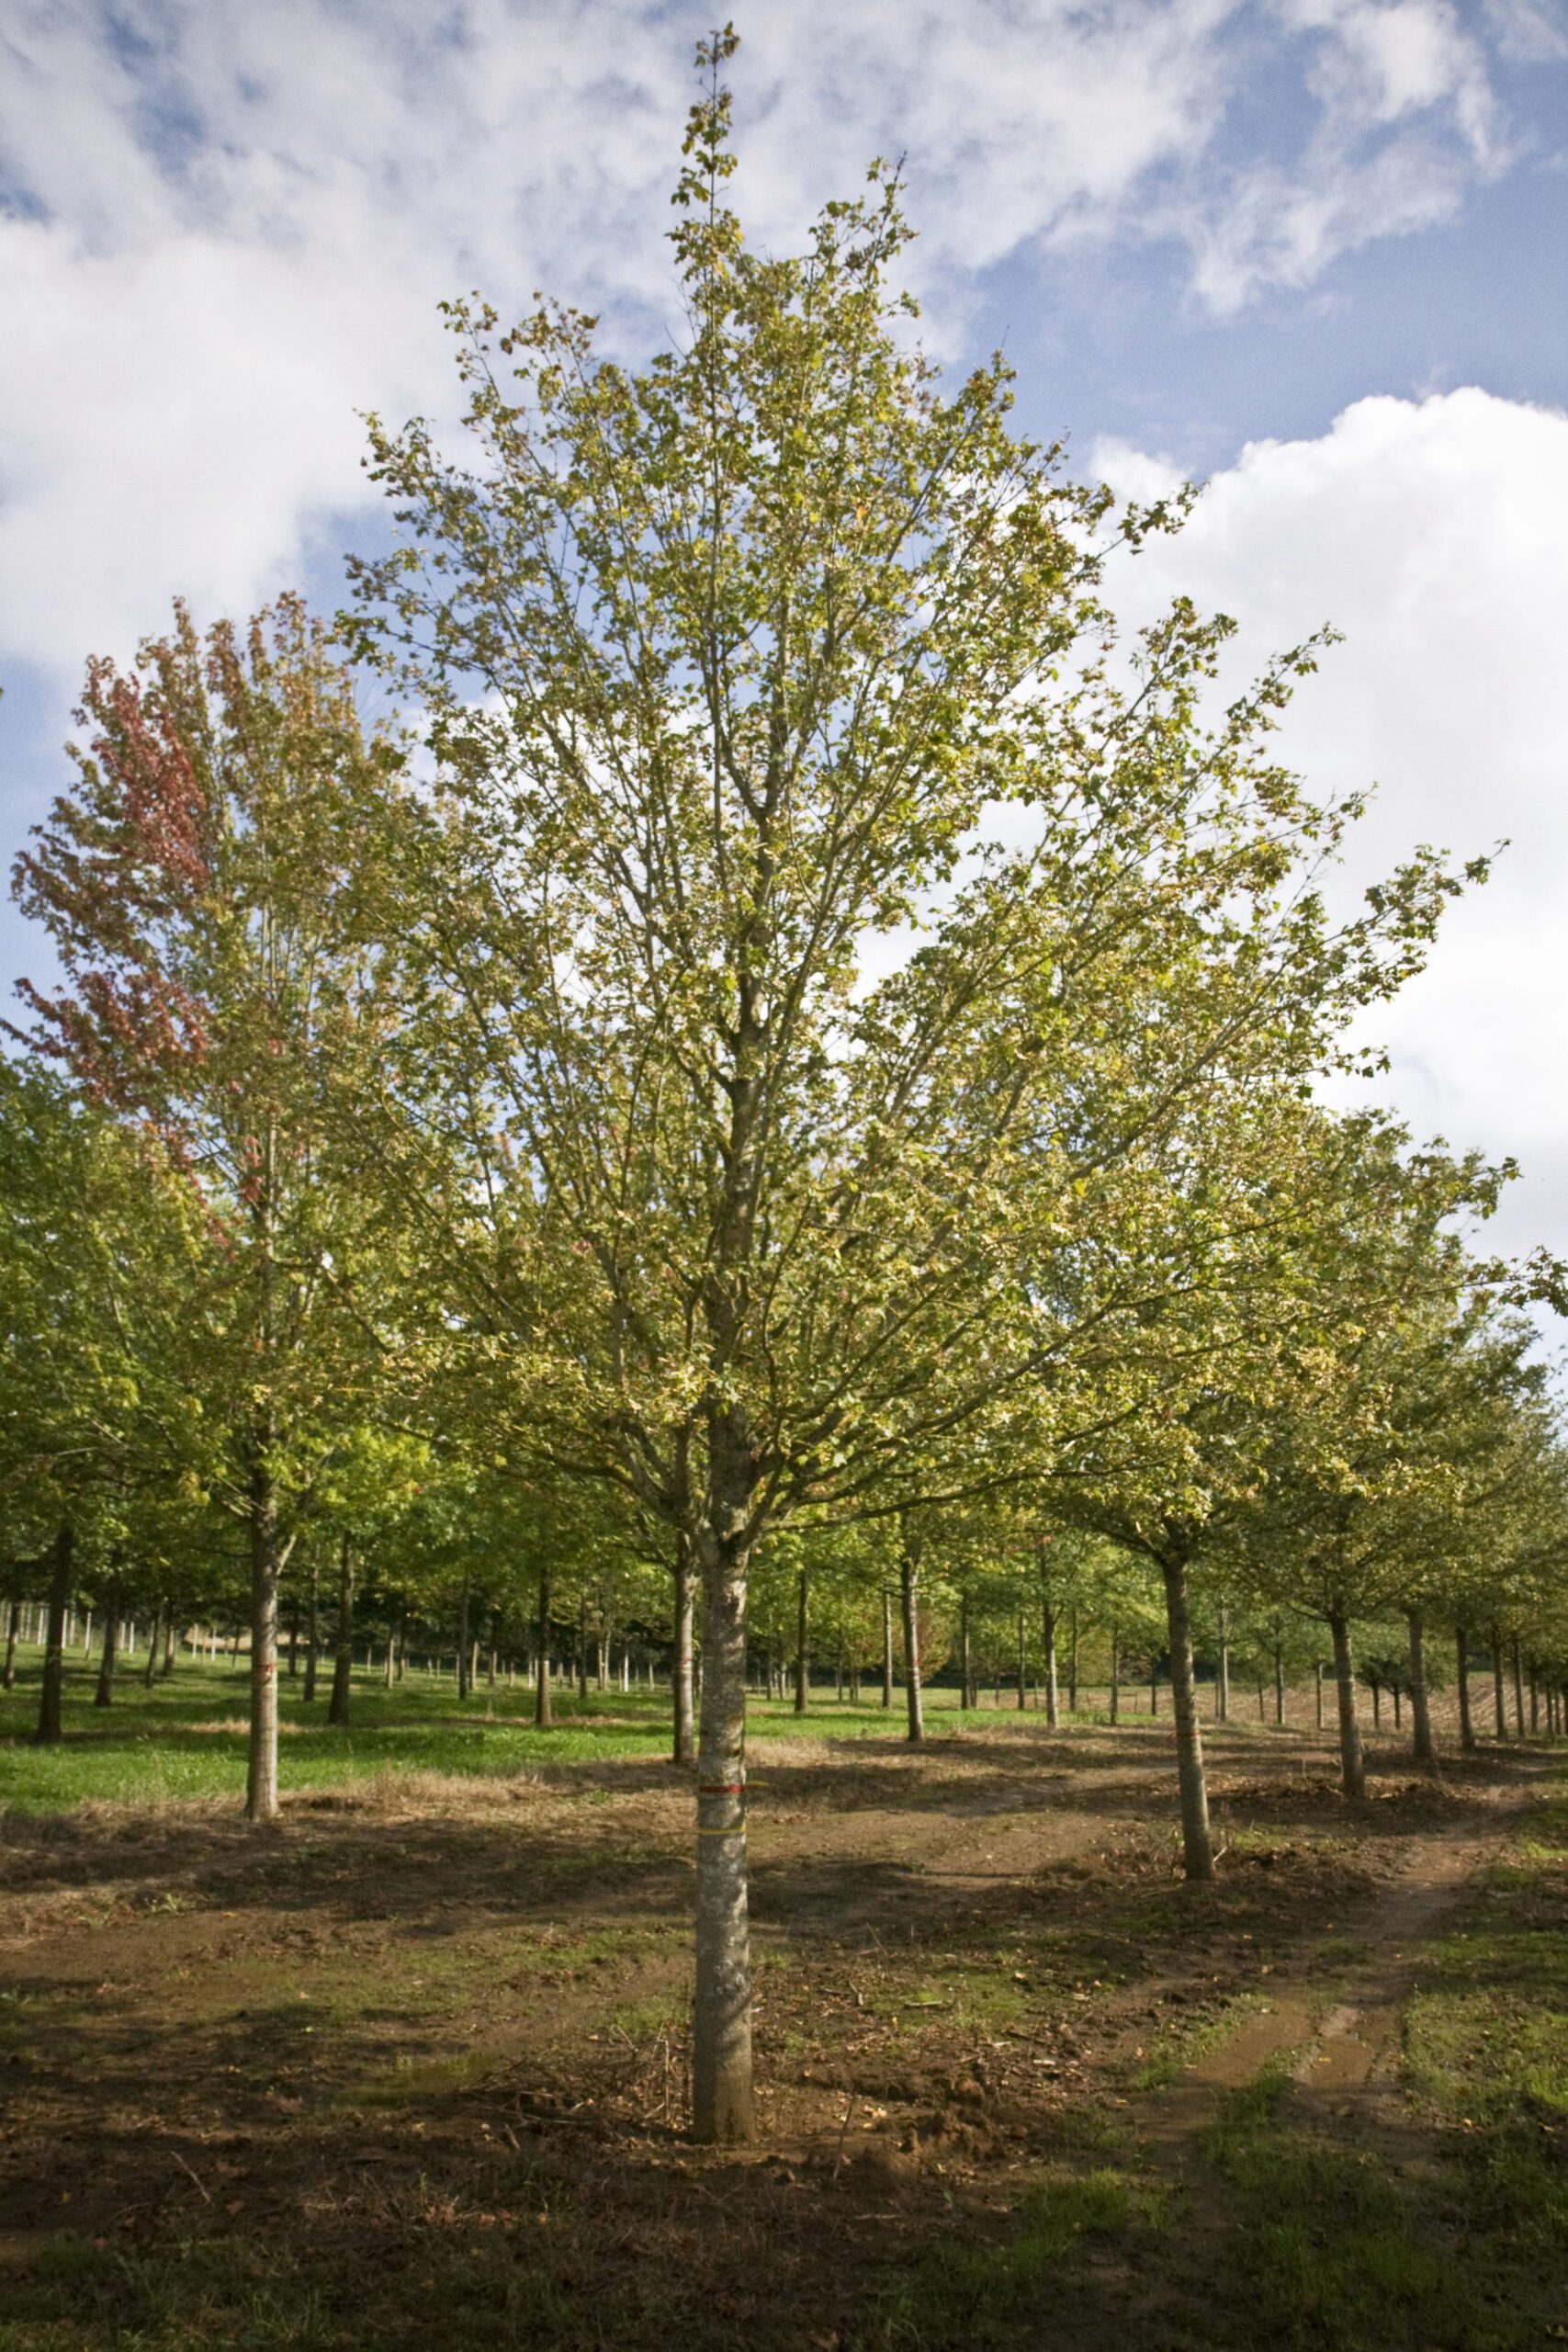 Acer campestre Streetwise super semi-mature trees growing in field